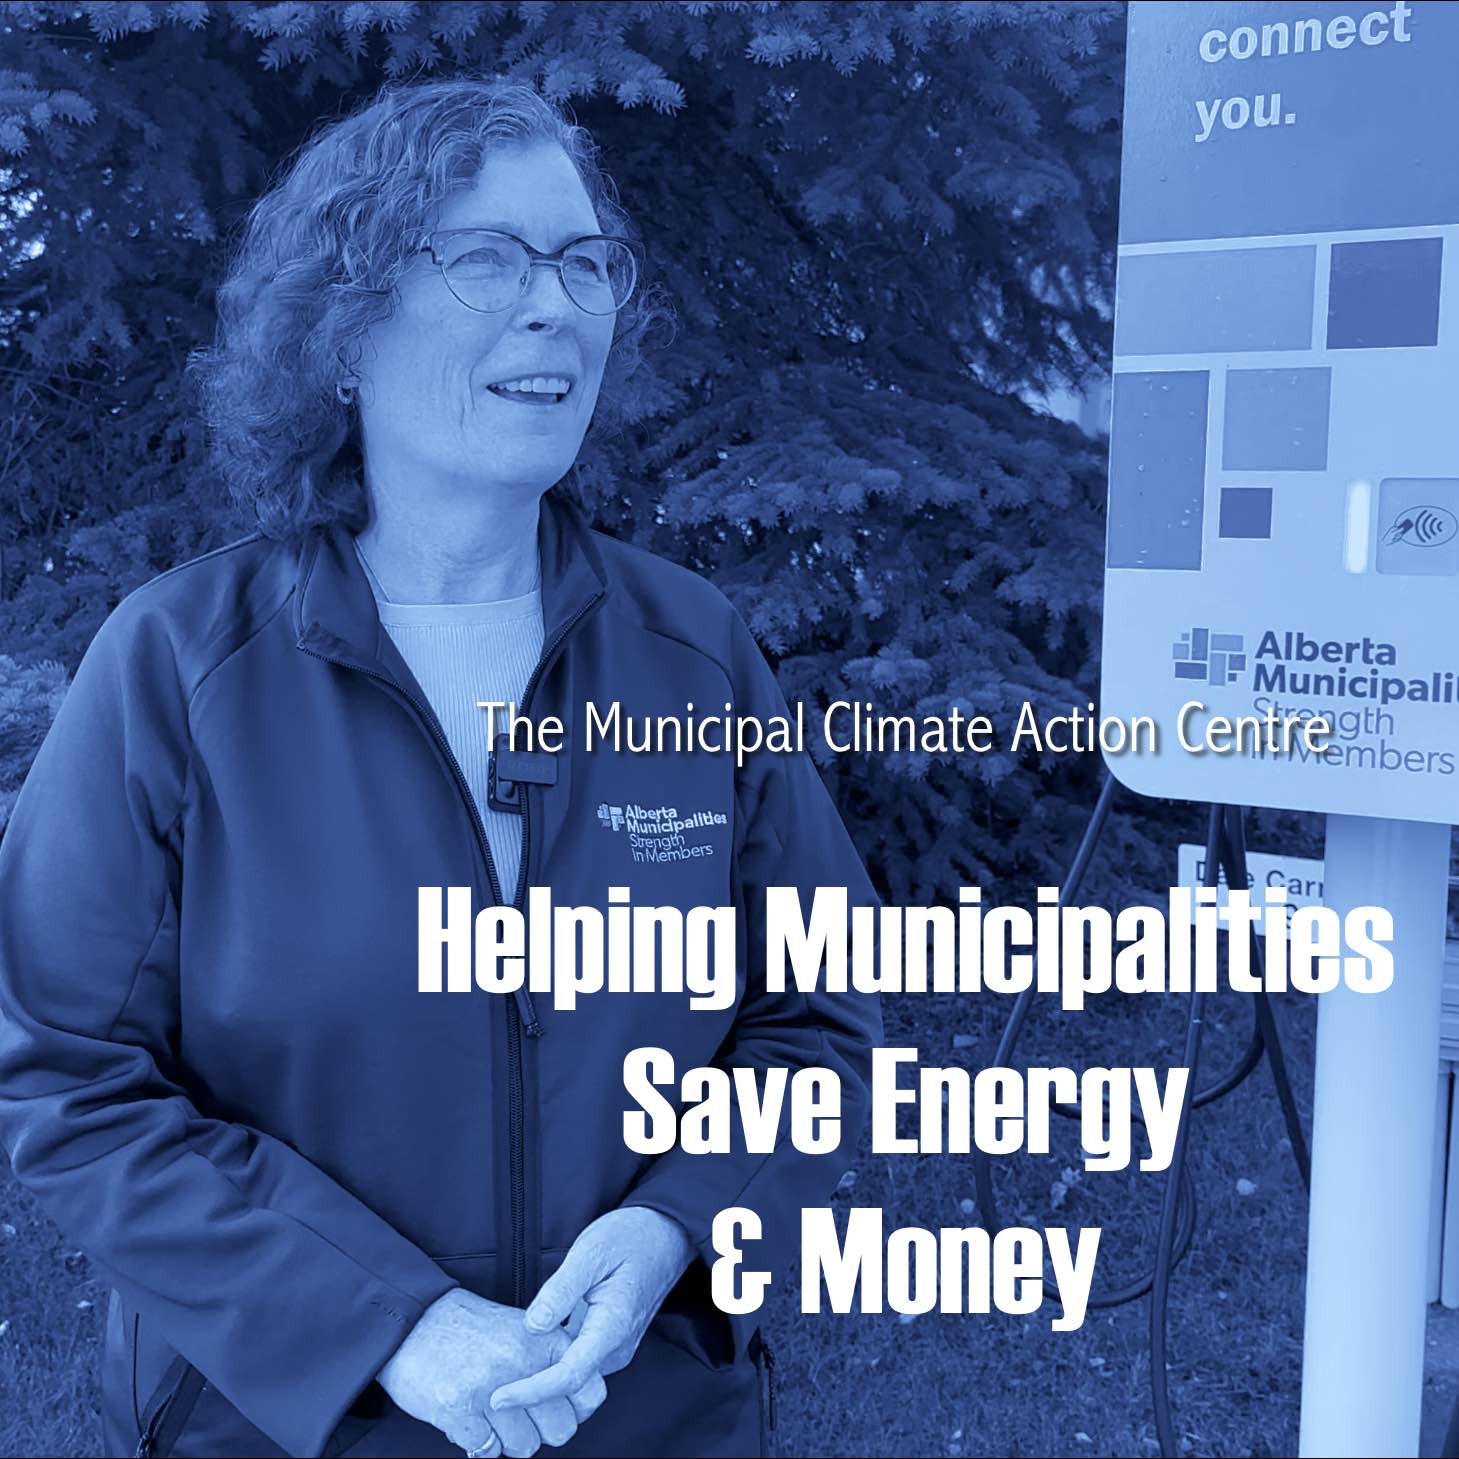 municipalies Archives - Green Energy Futures